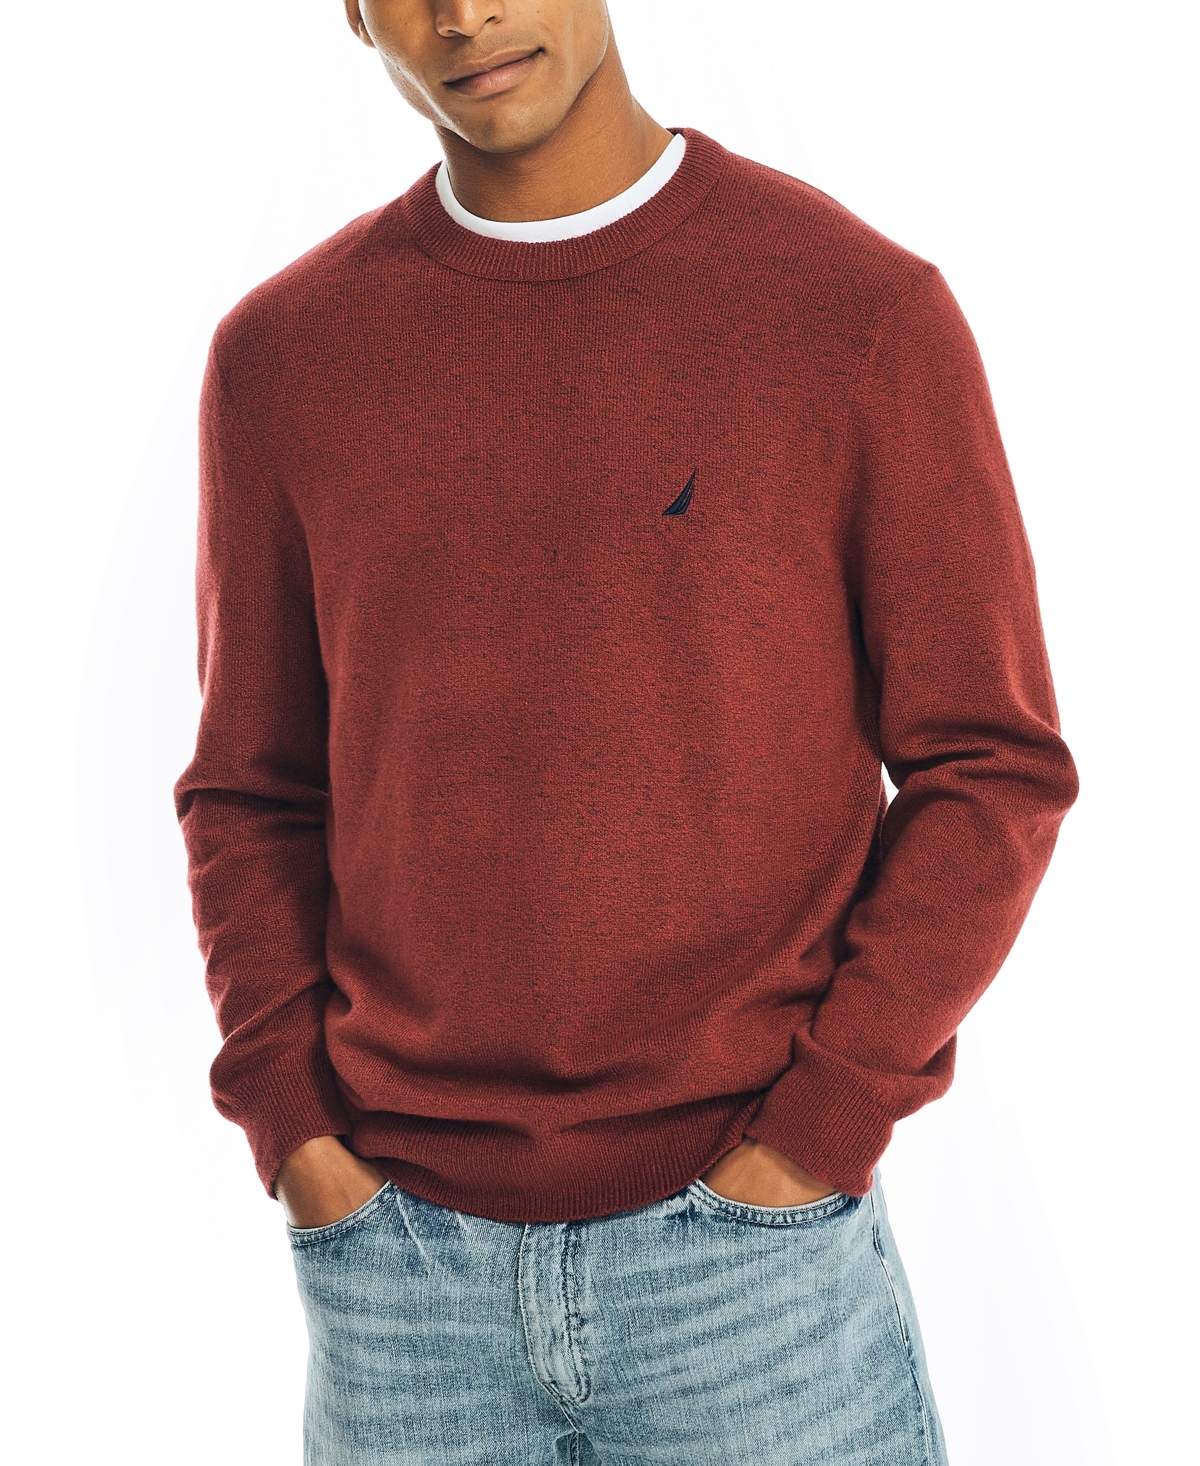 Nautica Men's Sustainably Crafted Crewneck Sweater In Biking Red